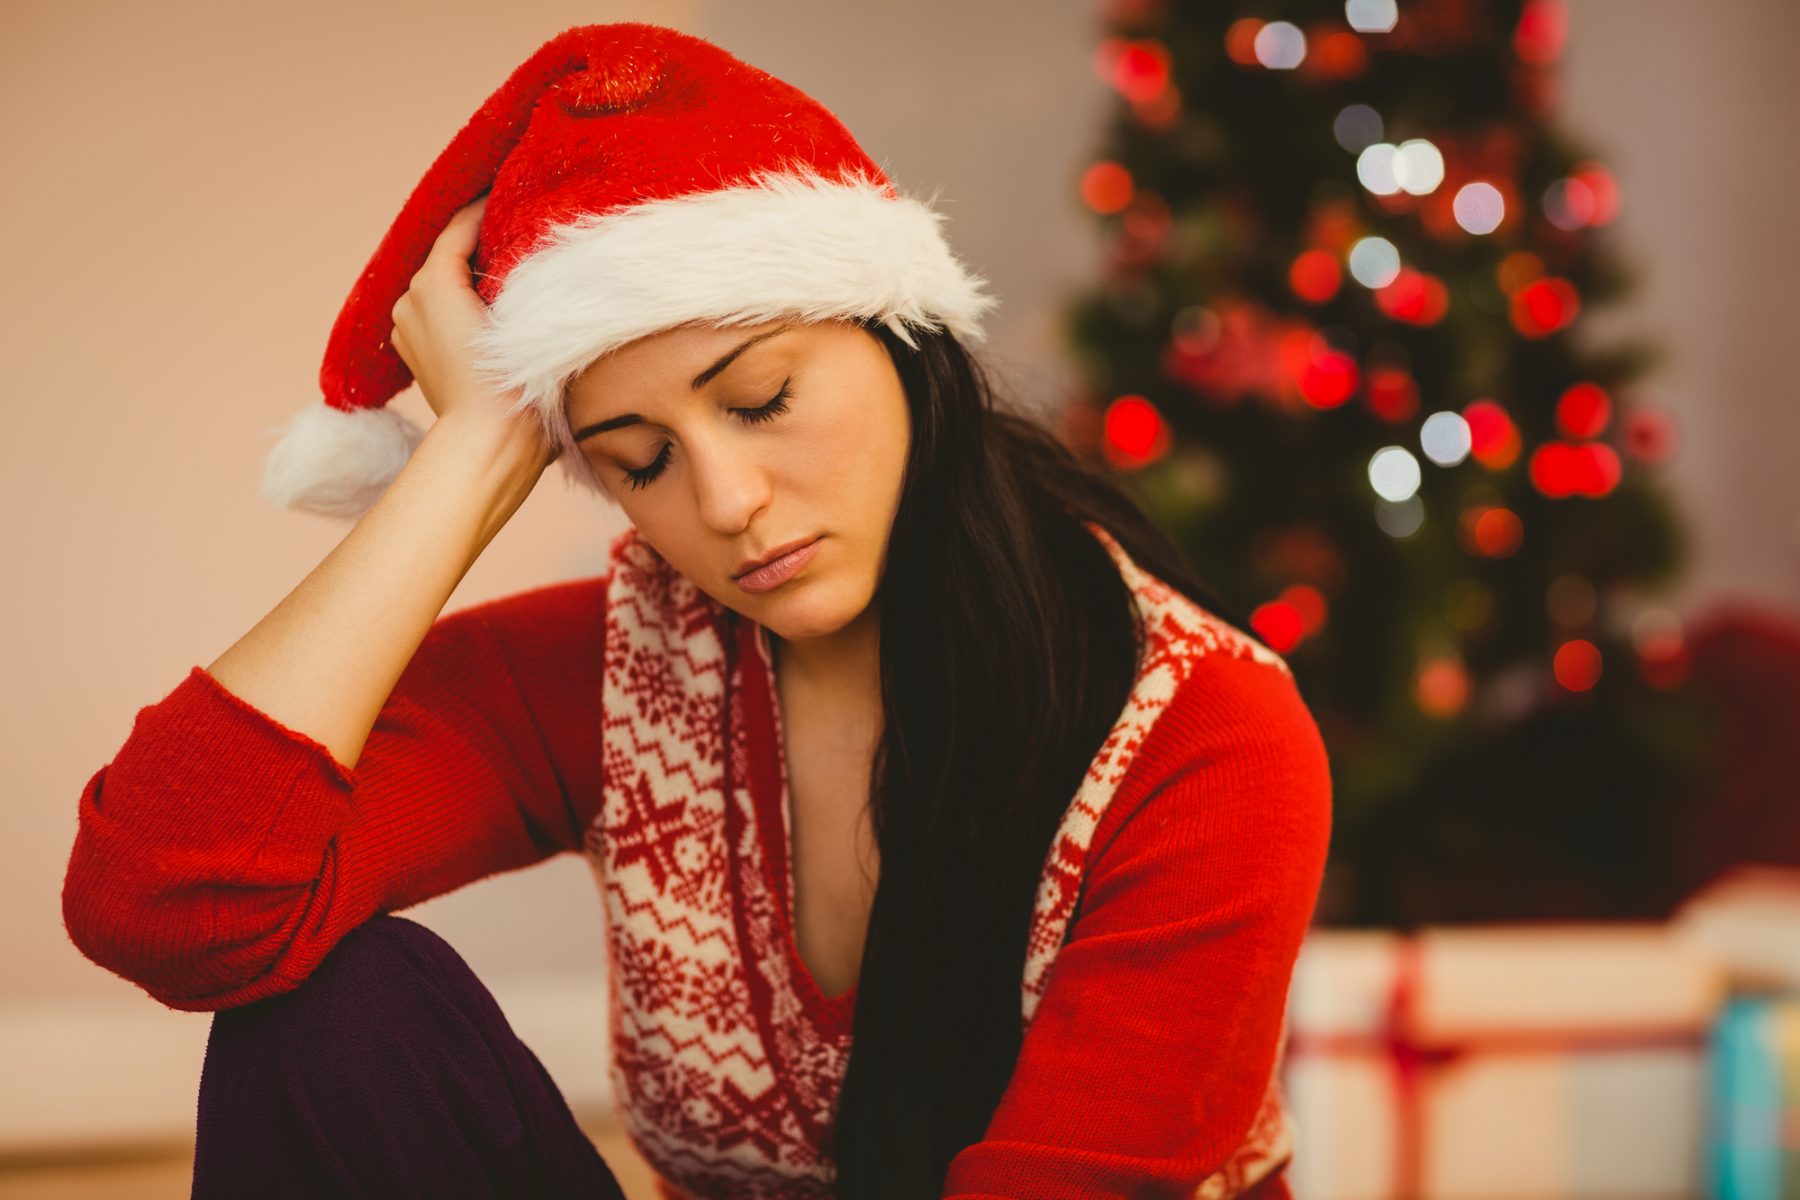 Woman with Seasonal Affective Disorder wearing holiday garb with Christmas tree in background